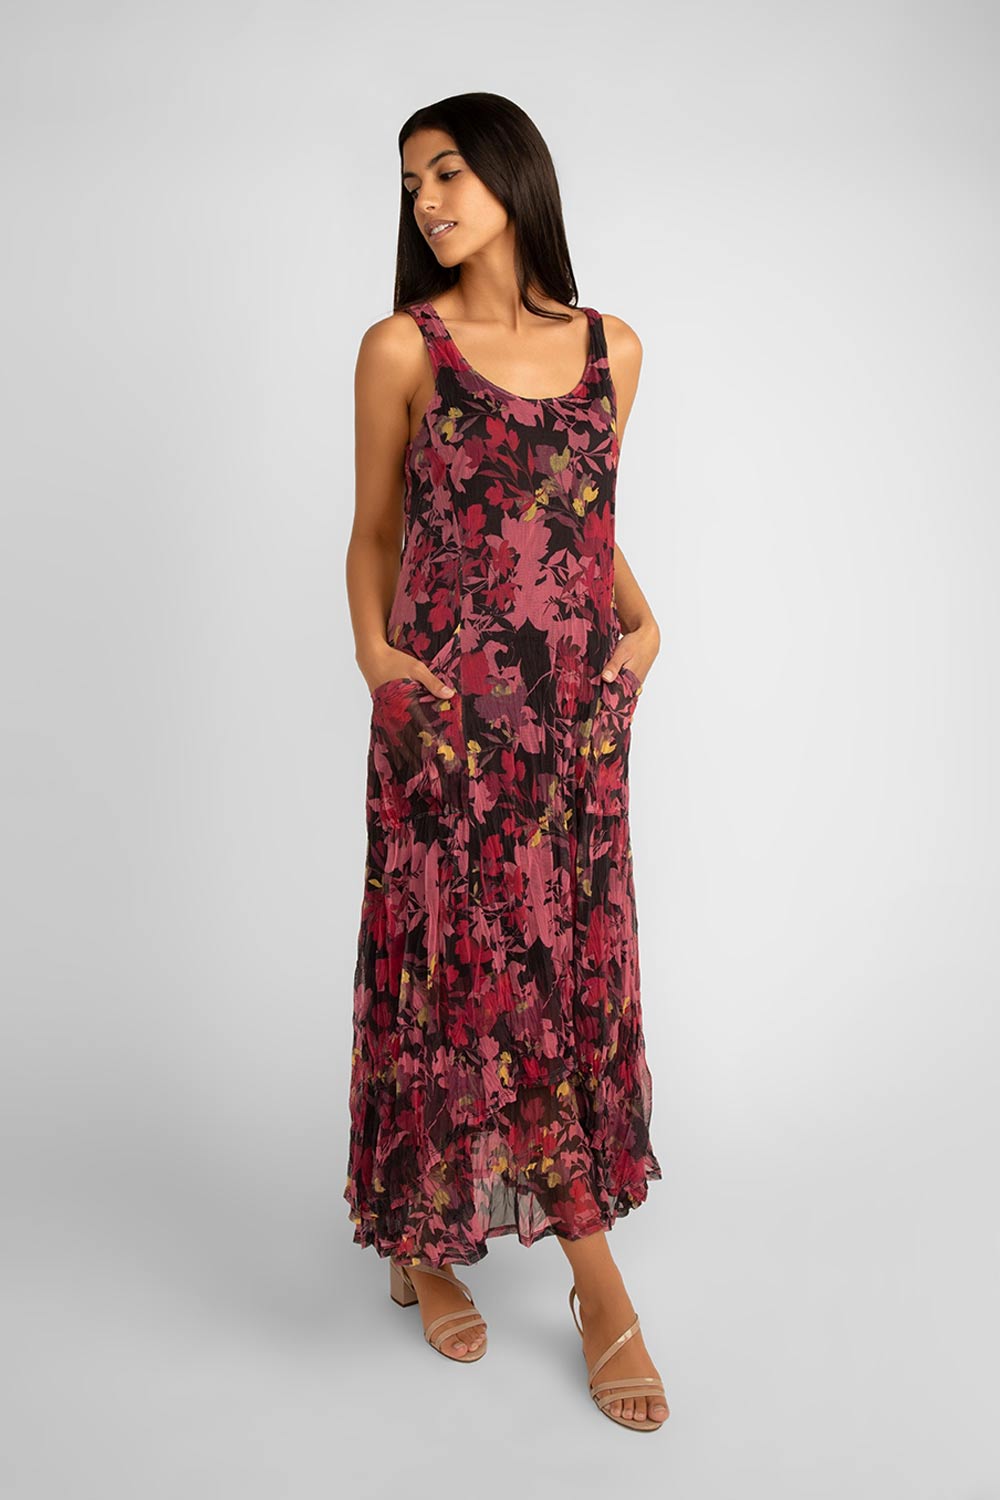 Front view of Picadily (jn606lz)Women's Sleeveless Scoop Neck Pink Floral Crinkle Mesh Maxi Dress with Pockets